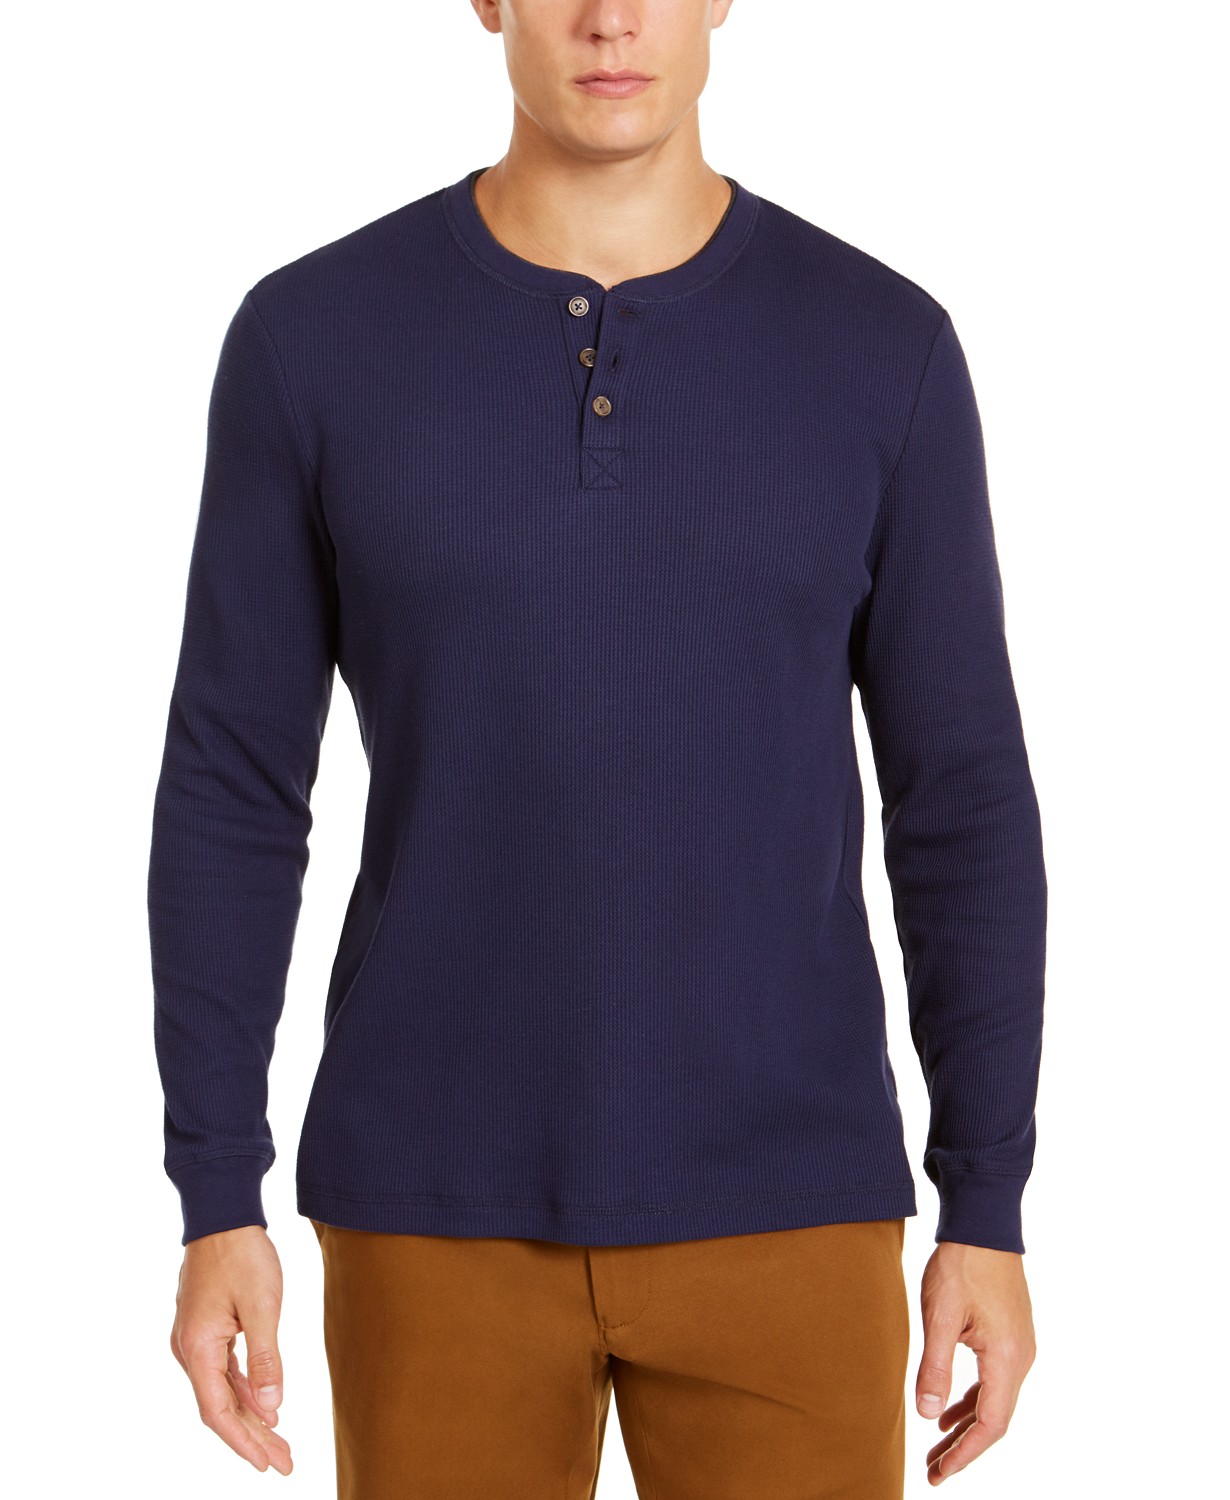 woocommerce-673321-2209615.cloudwaysapps.com-club-room-mens-navy-thermal-henley-shirt